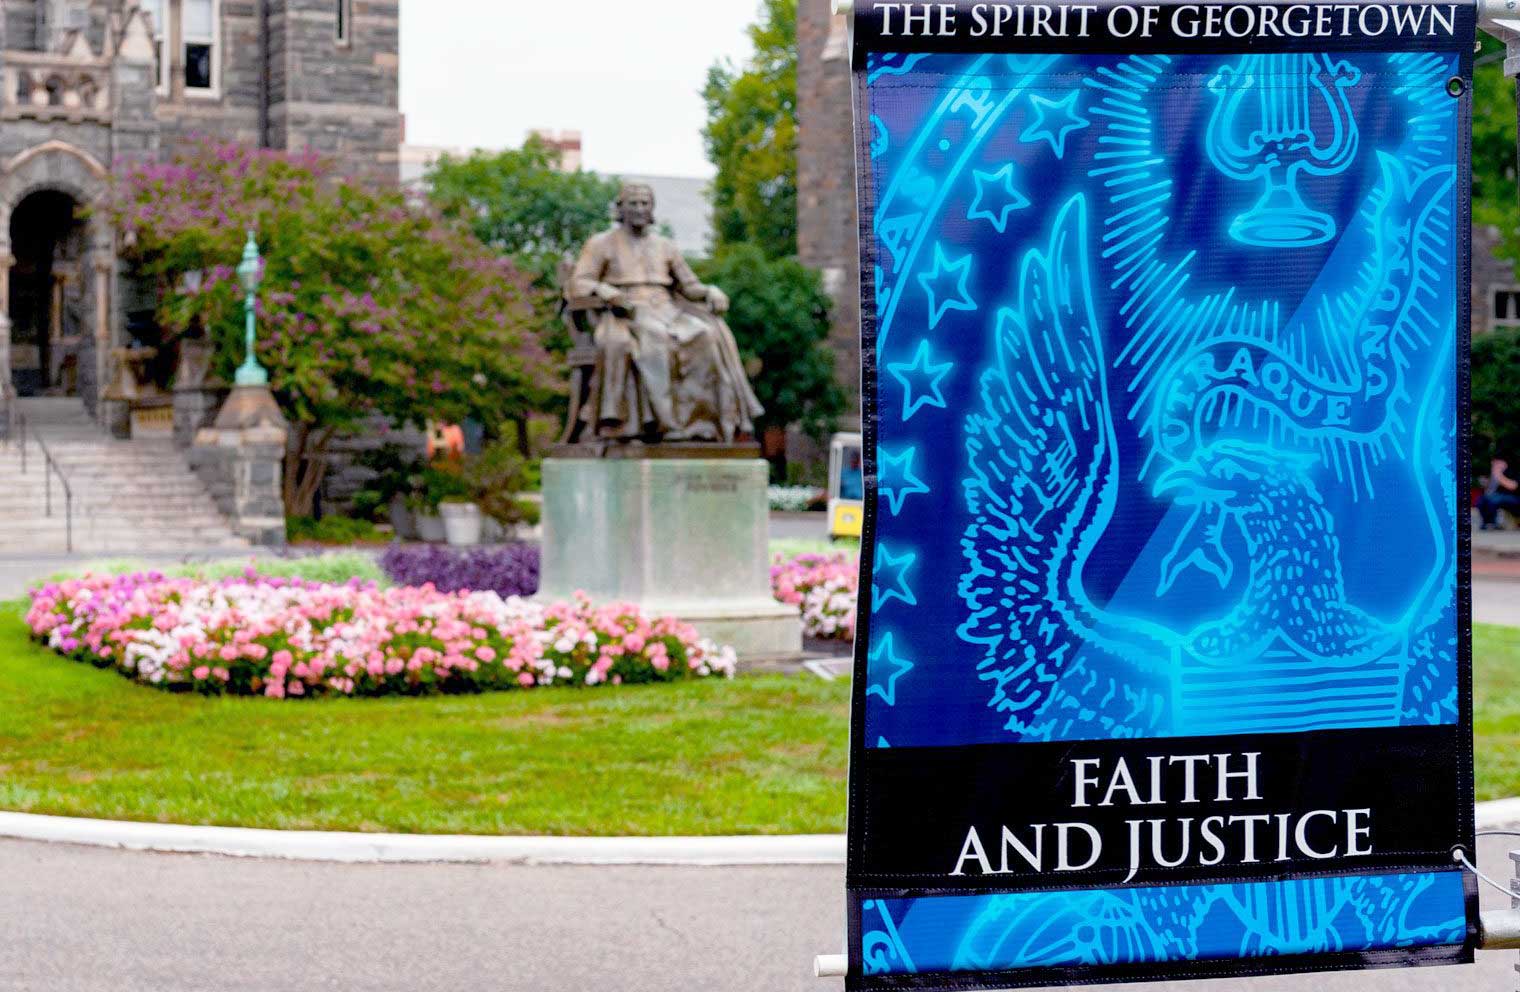 Image of John Carroll Statue, in front of Healy Hall, surrounded by flowering plants. In the foreground a banner with the words "Faith and Justice" and the GU Seal